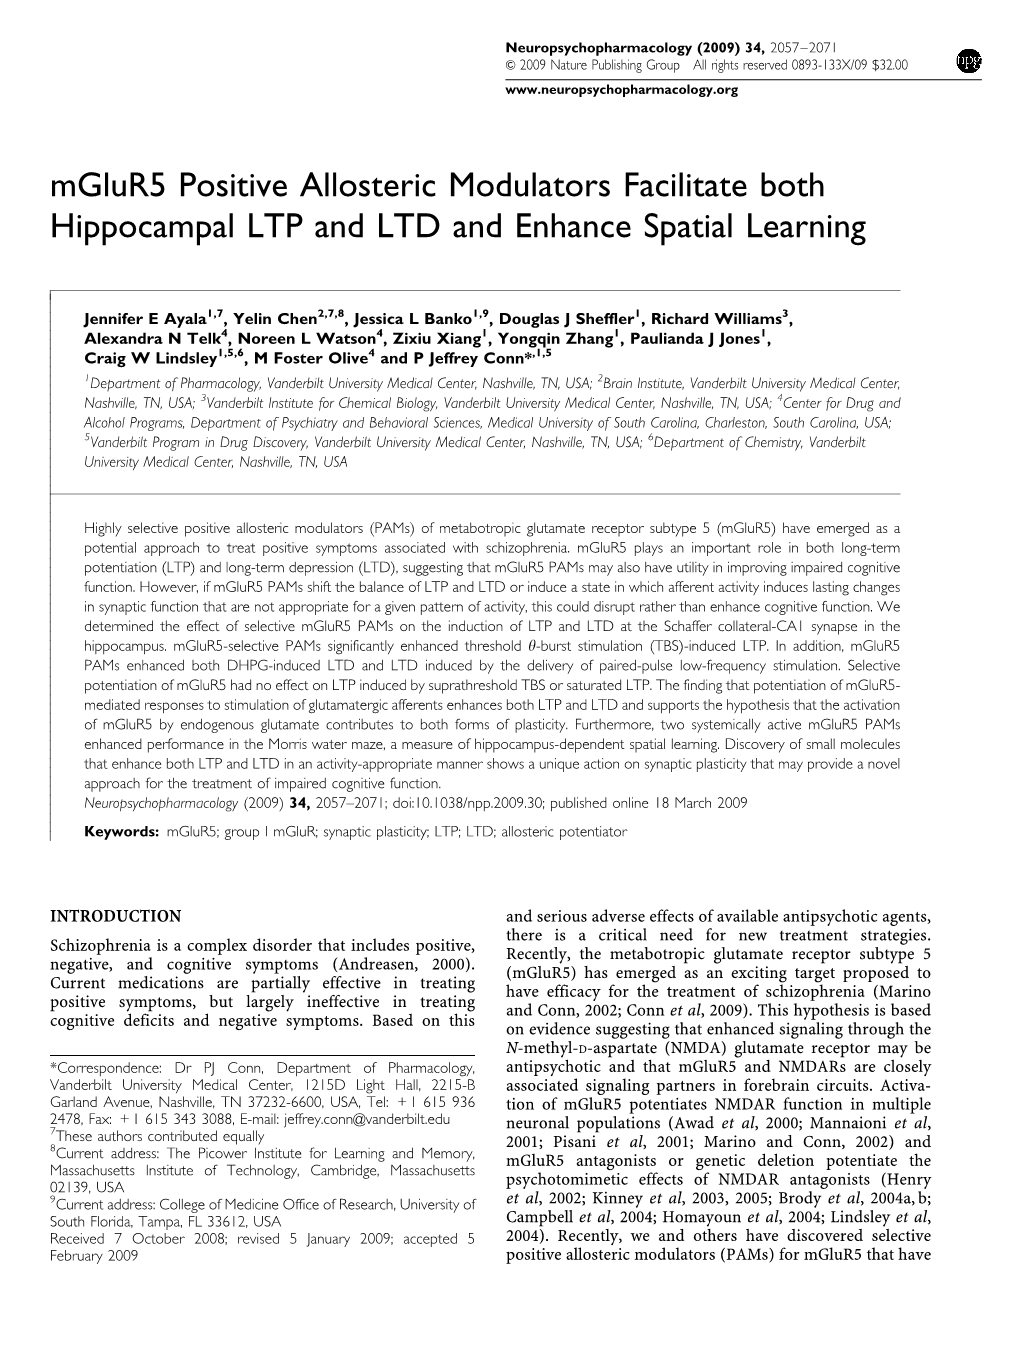 Mglur5 Positive Allosteric Modulators Facilitate Both Hippocampal LTP and LTD and Enhance Spatial Learning